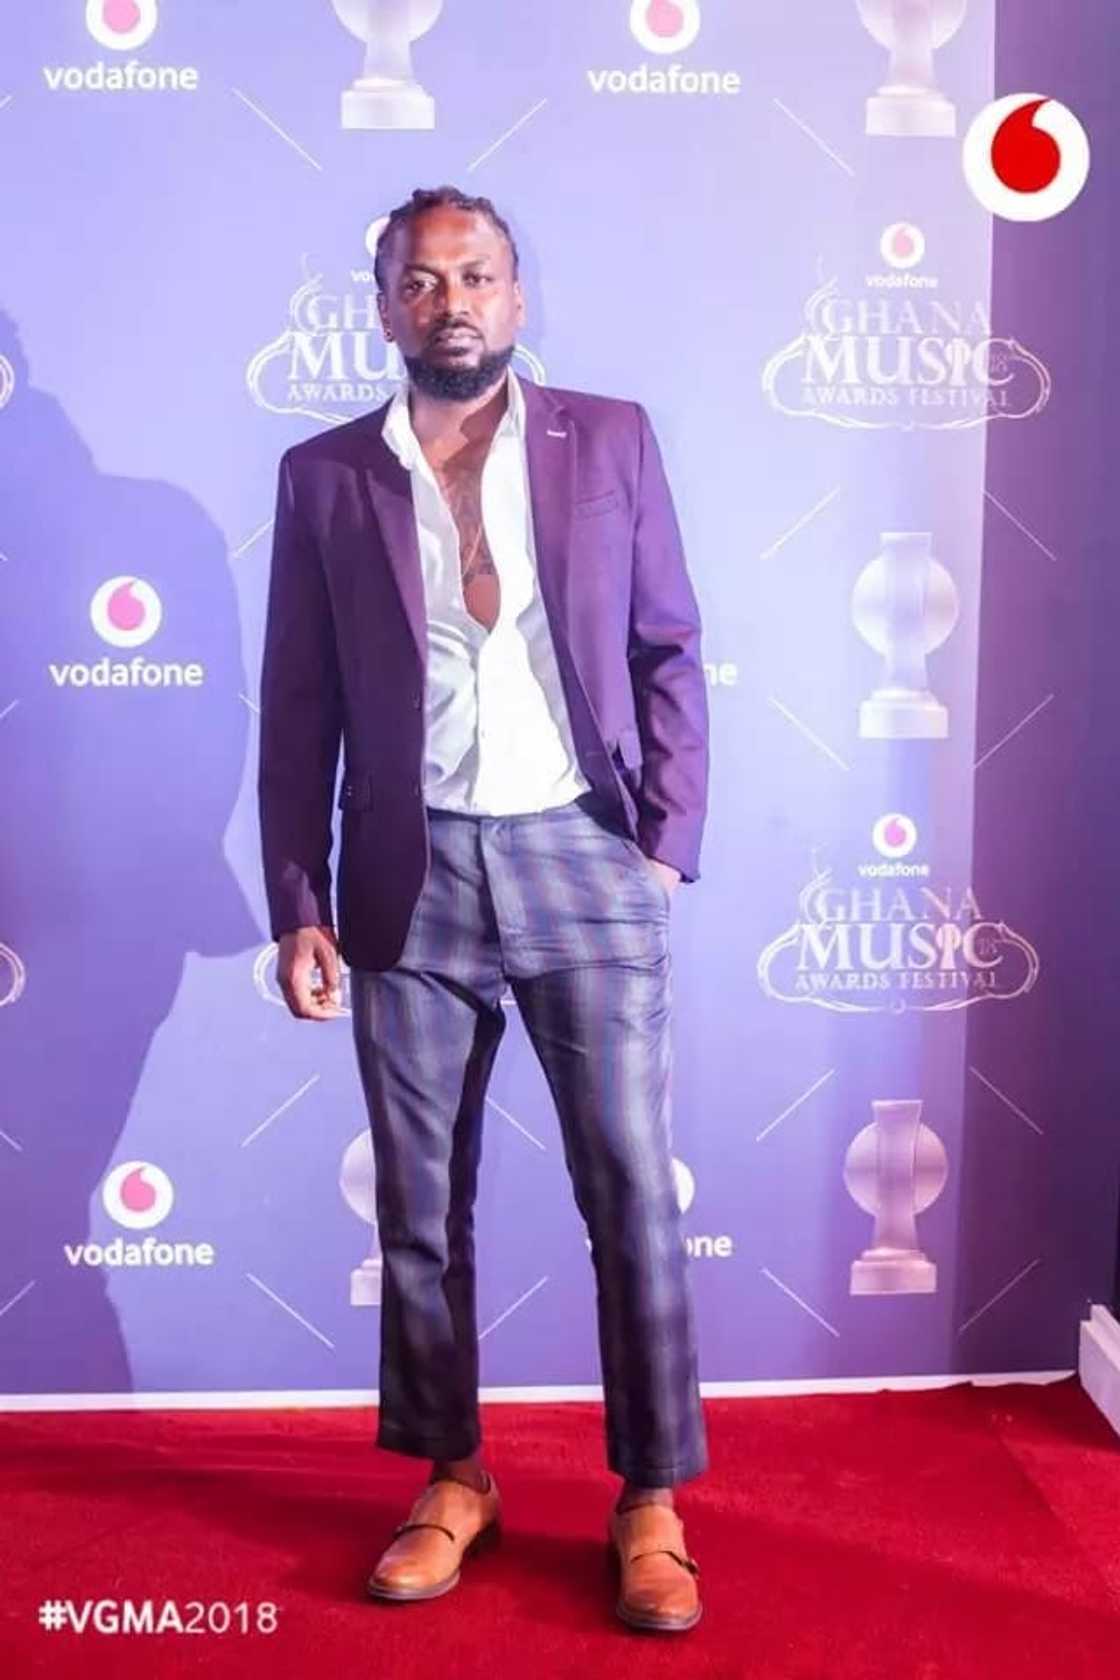 5 things we learned from the 2018 VGMA